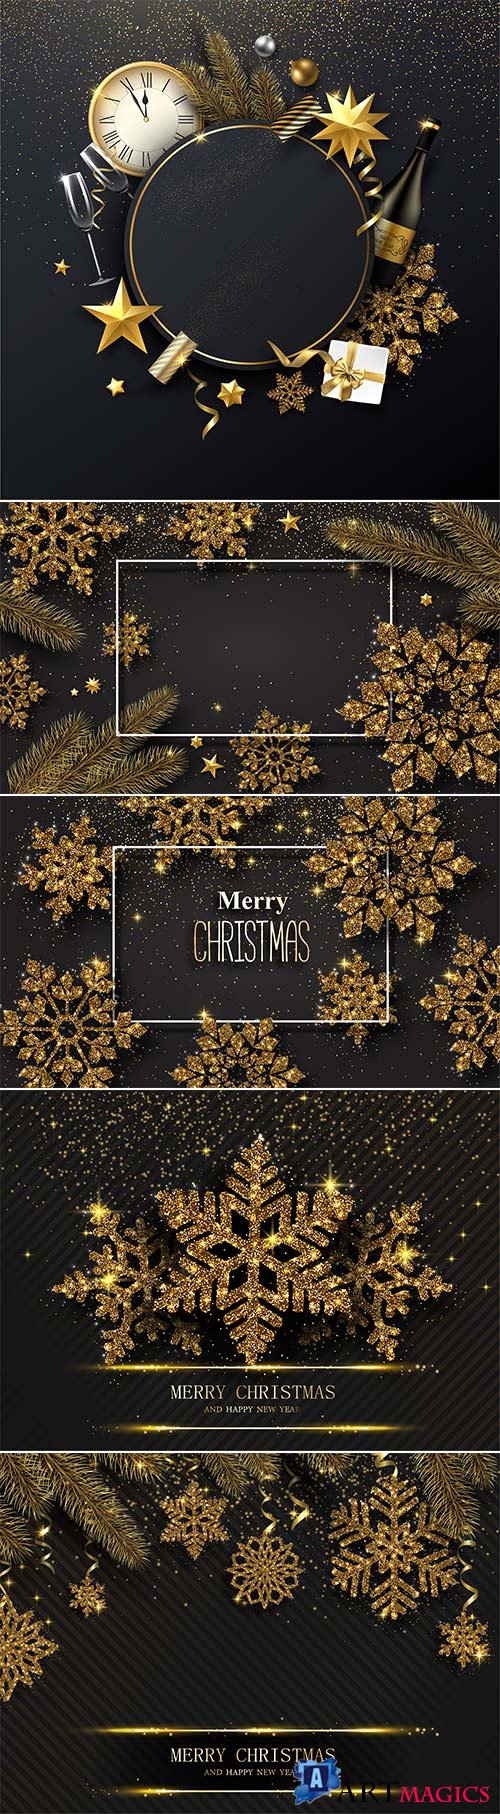 Christmas vector background with golden snowflakes, clock and champagne